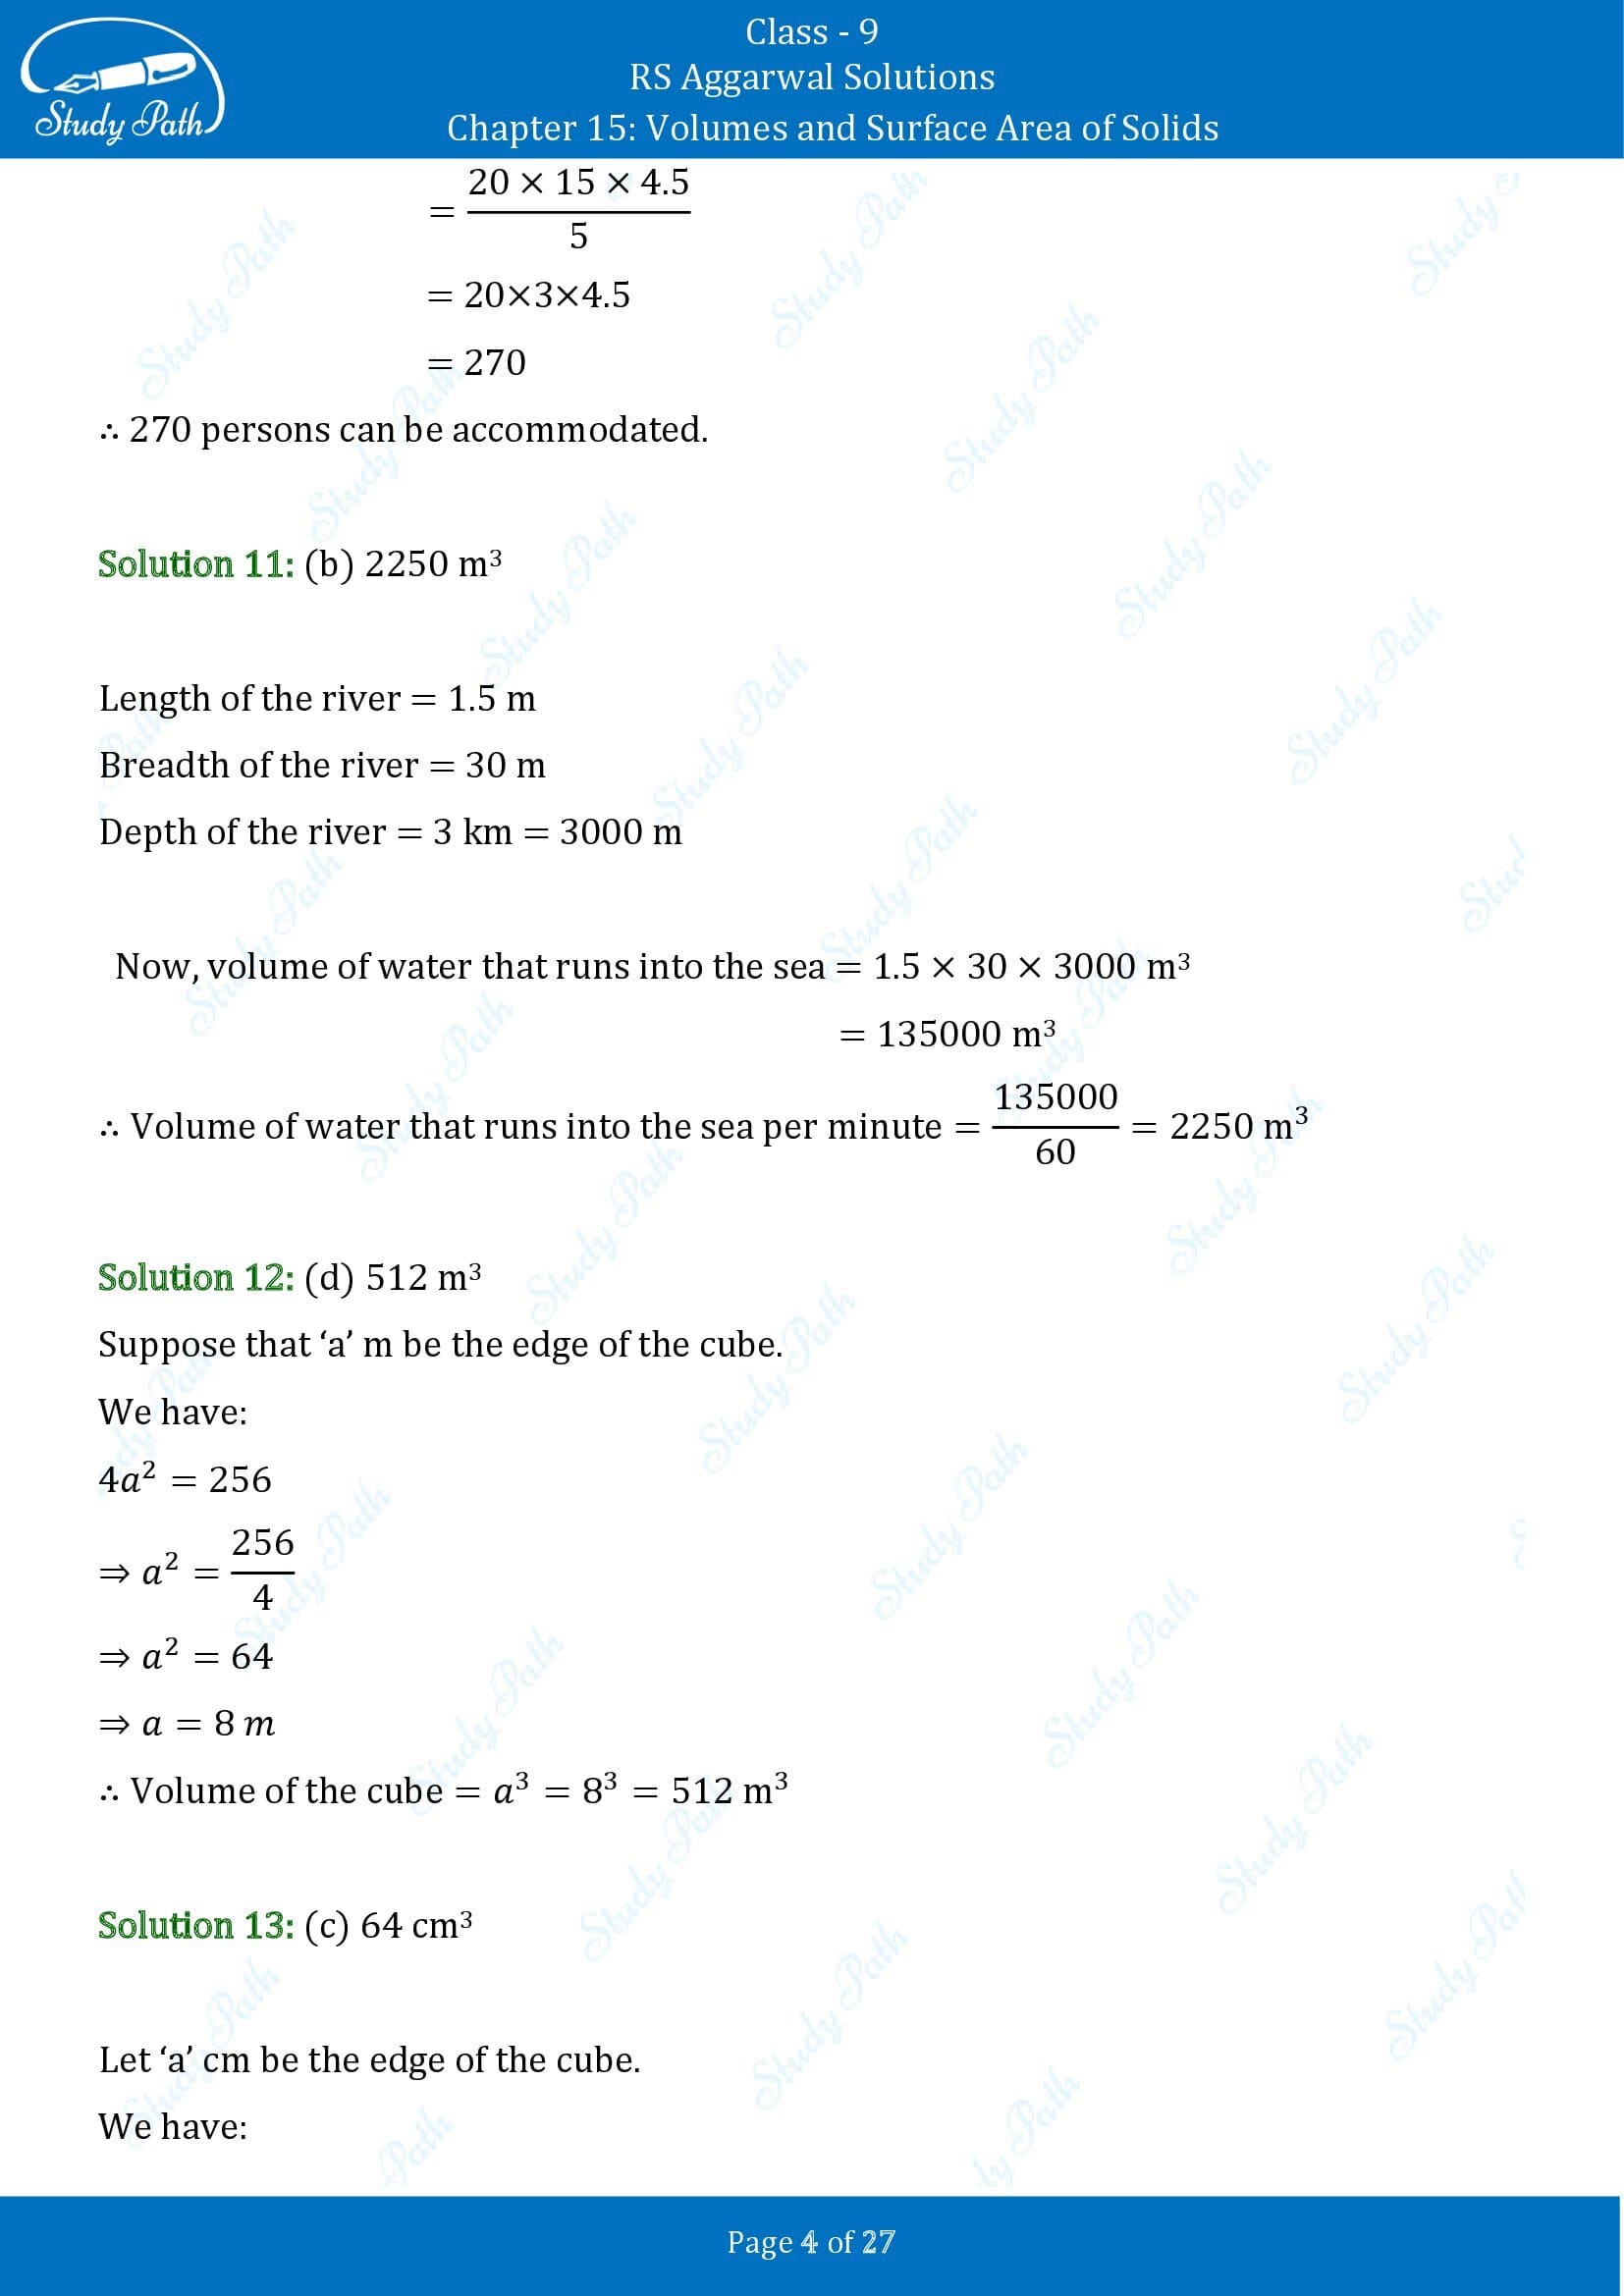 RS Aggarwal Solutions Class 9 Chapter 15 Volumes and Surface Area of Solids Multiple Choice Questions MCQs 00004